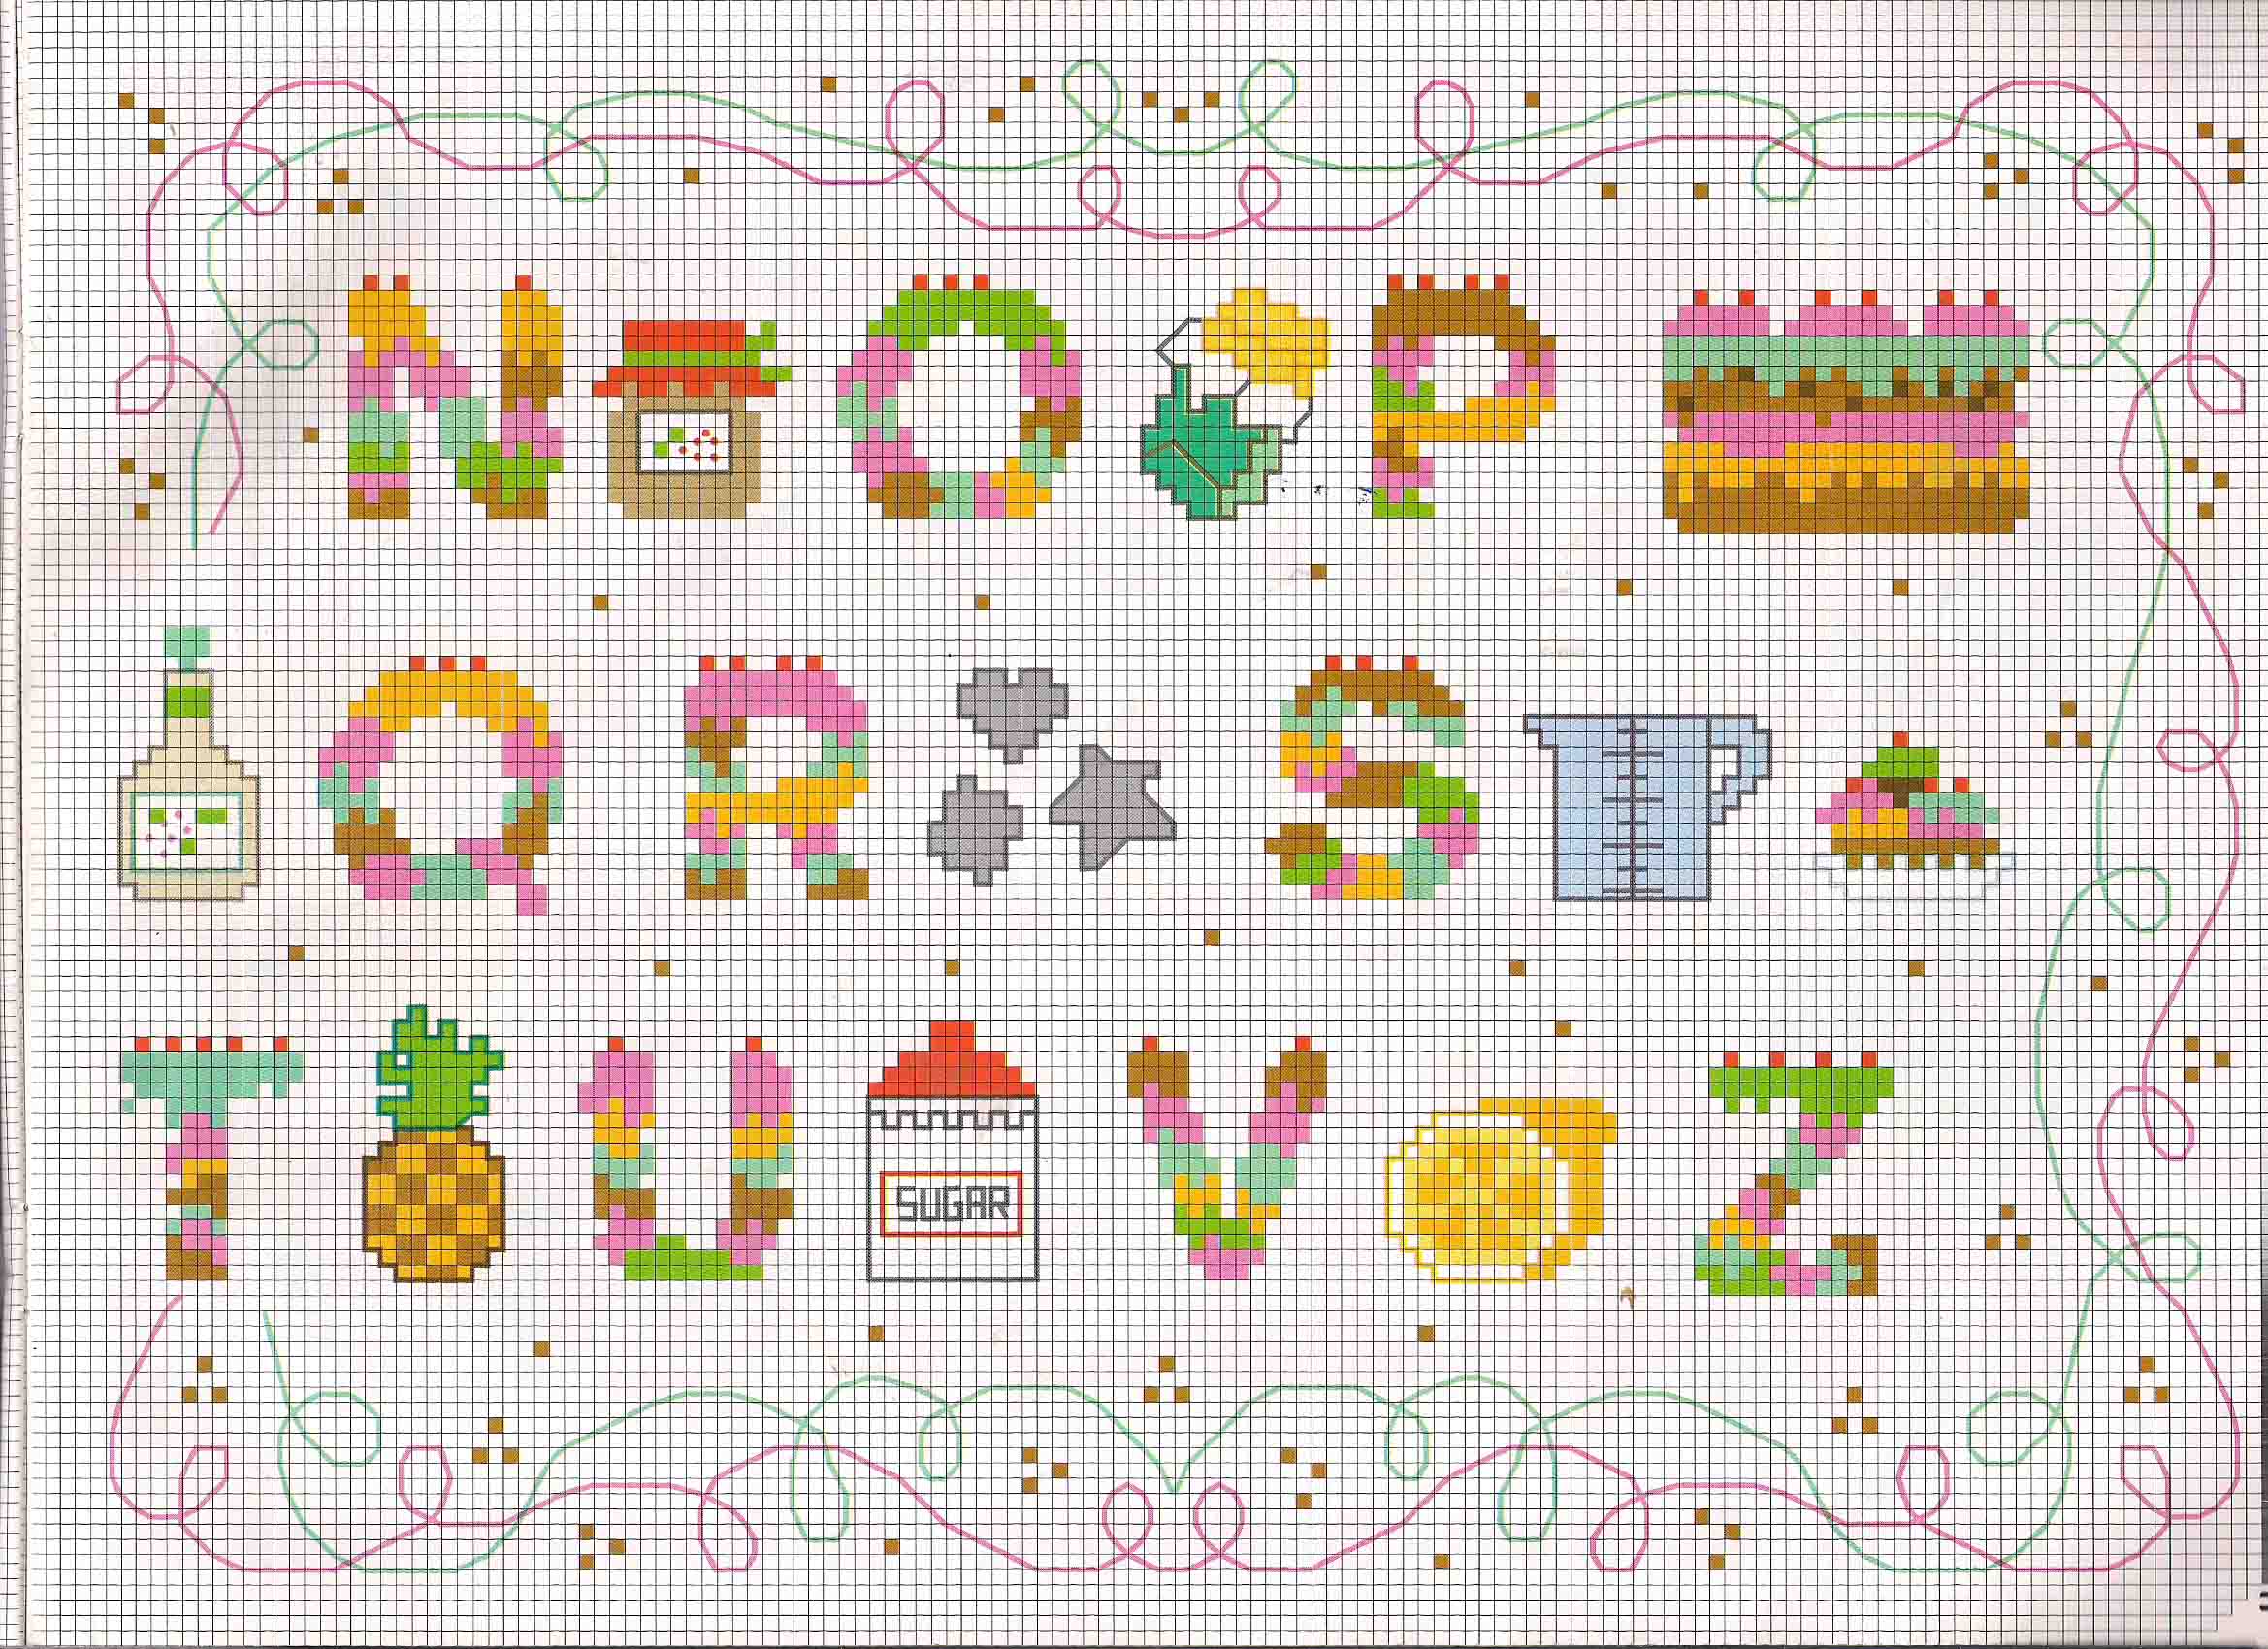 Cross stitch alphabet with cakes and pastries (2)